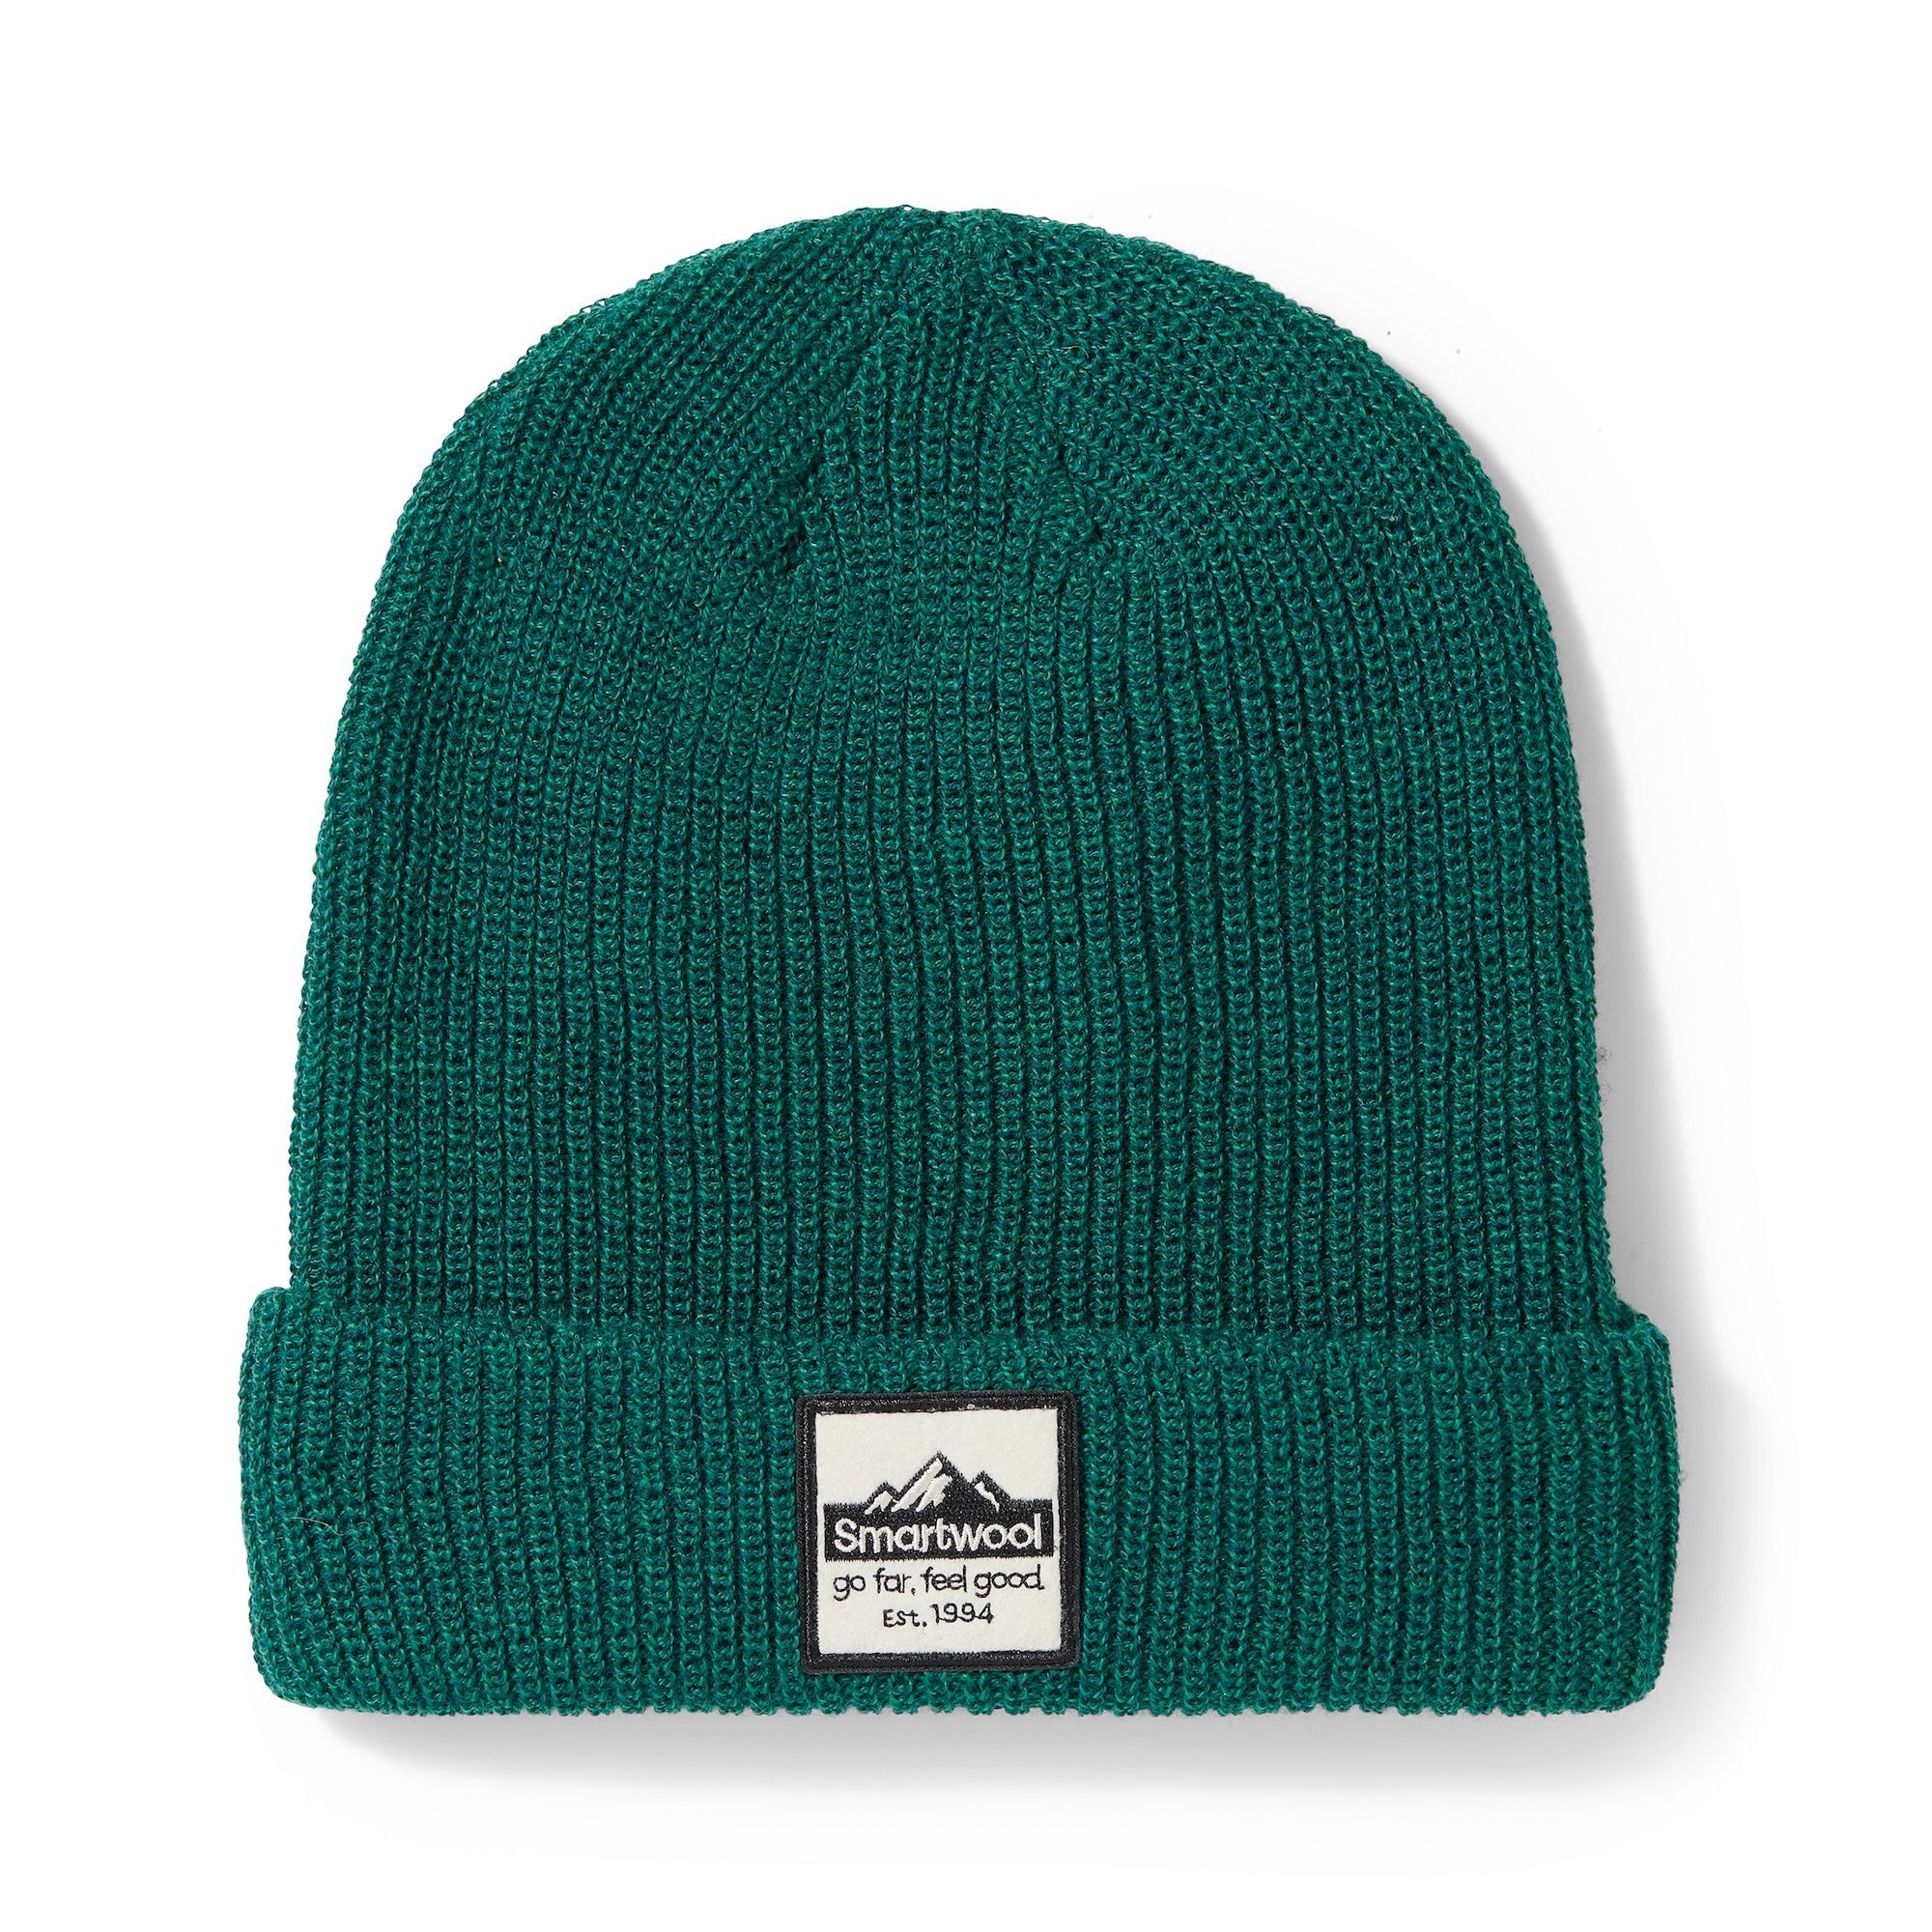 Smartwool Smartwool Patch Beanie - Pipo